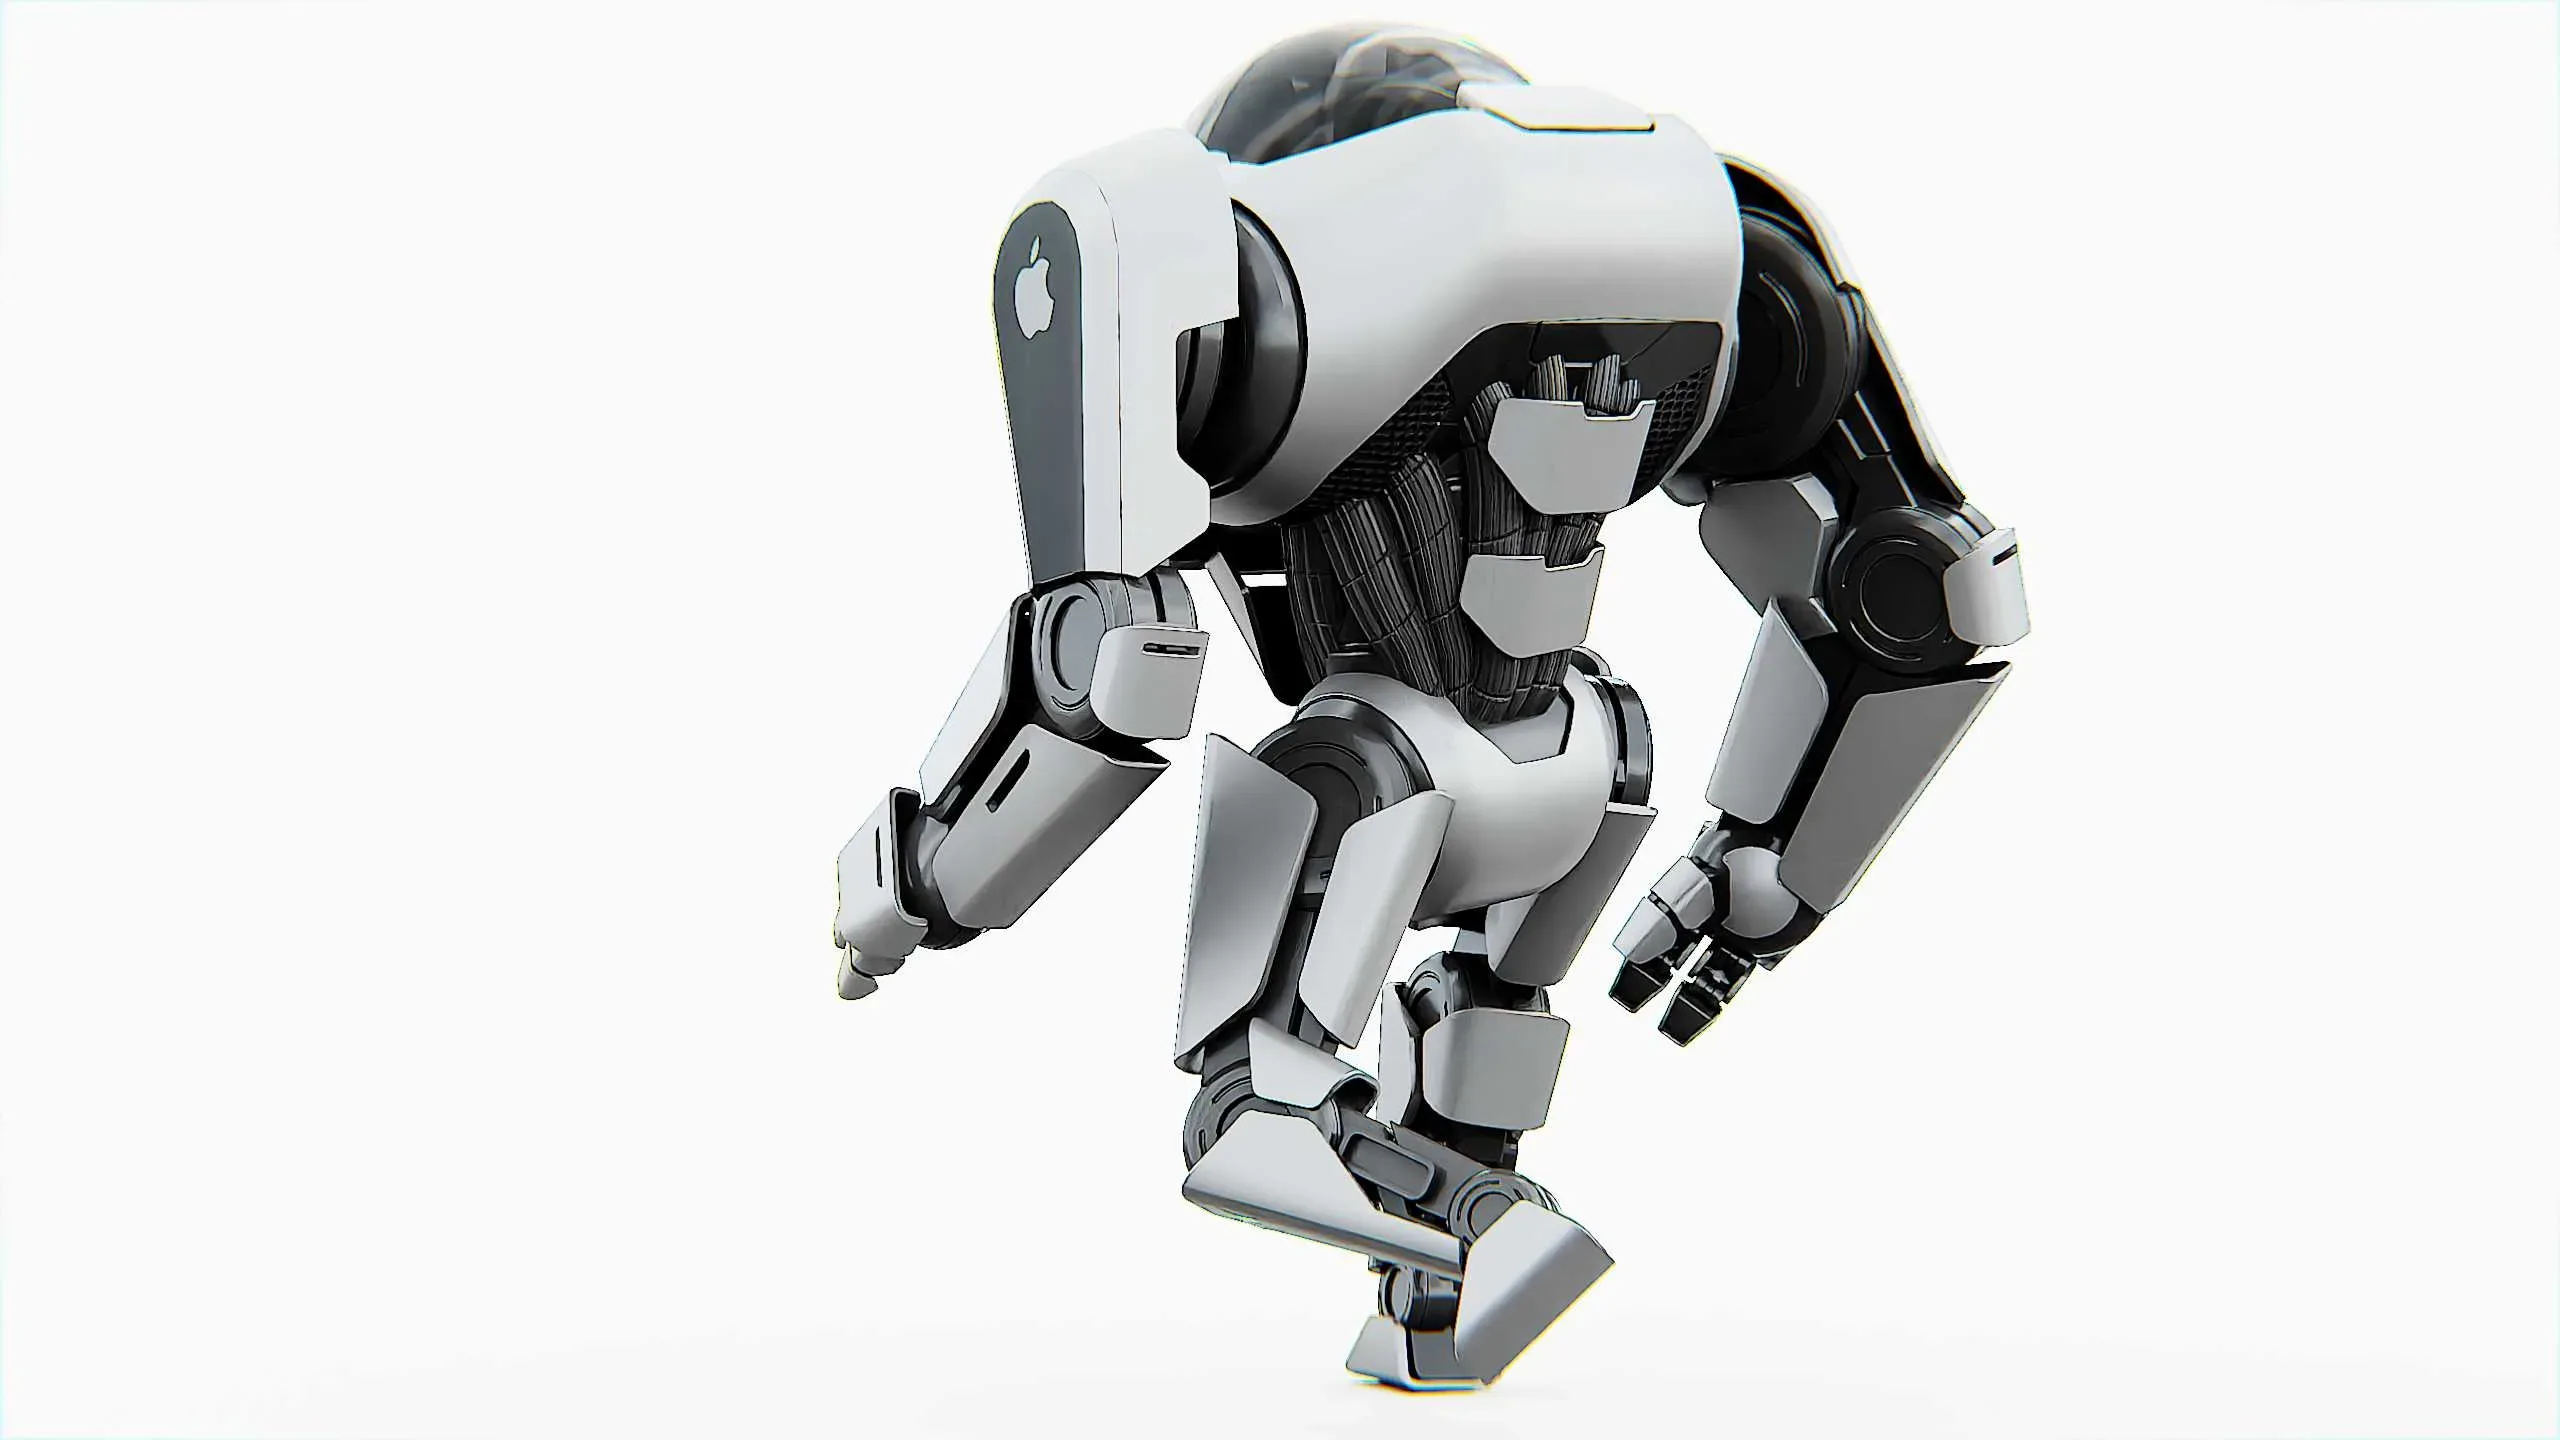 APPLE BOT Auto-Rig Pro Rigged For Mixamo, Unreal Engine, Unity